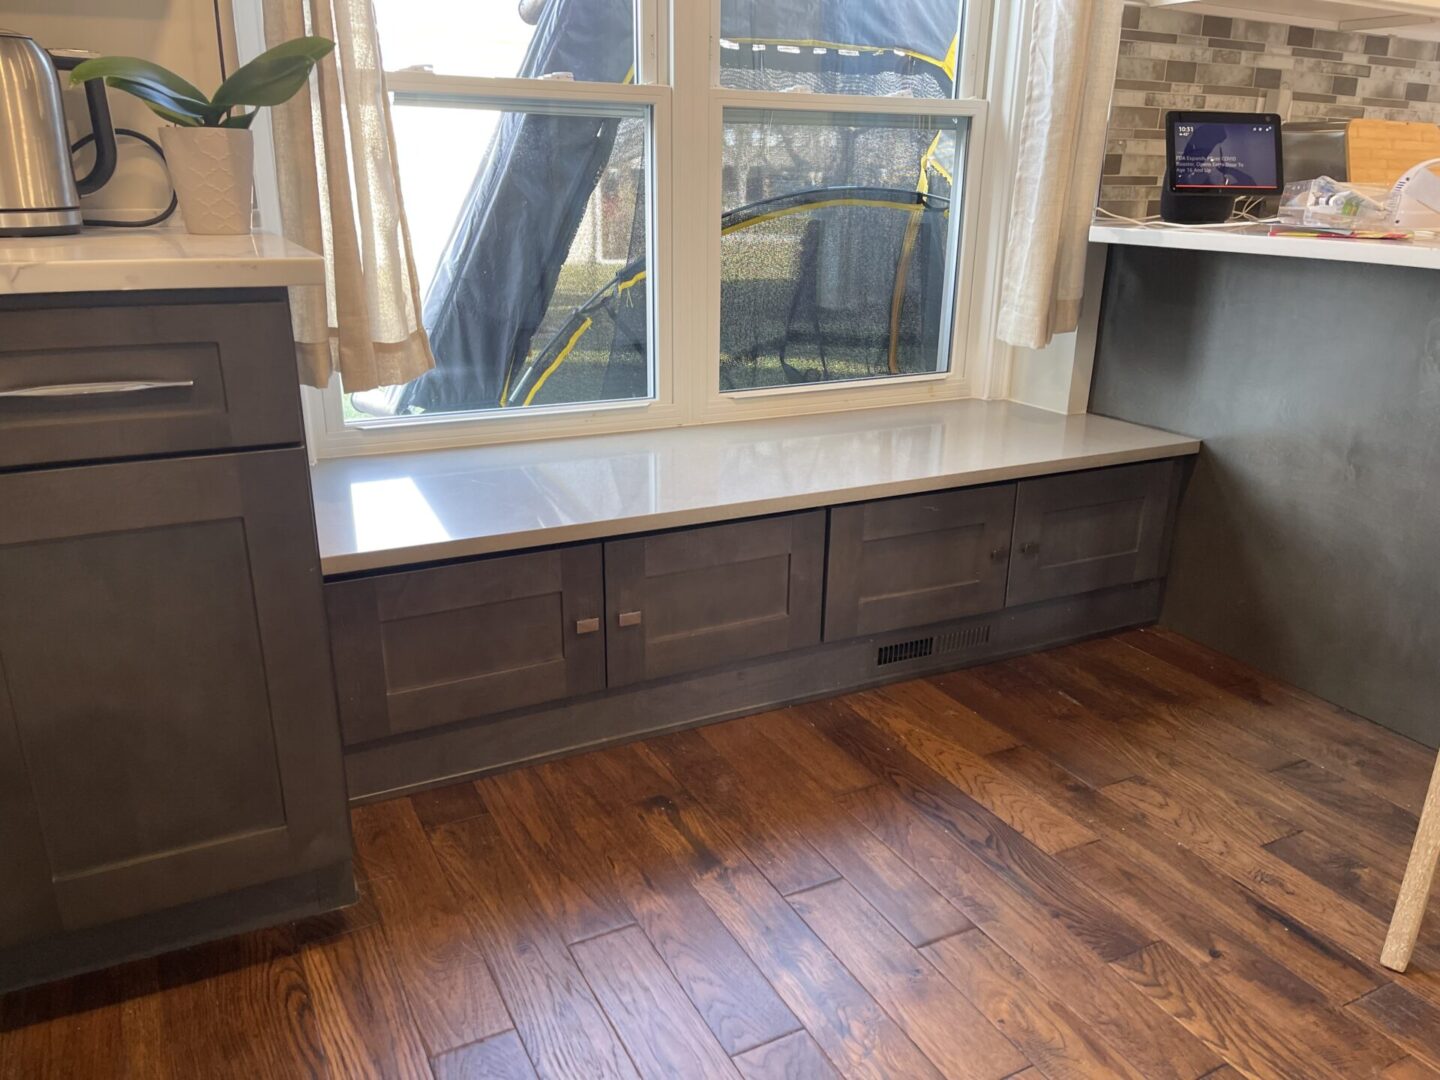 A window seat in a kitchen with gray cabinets.